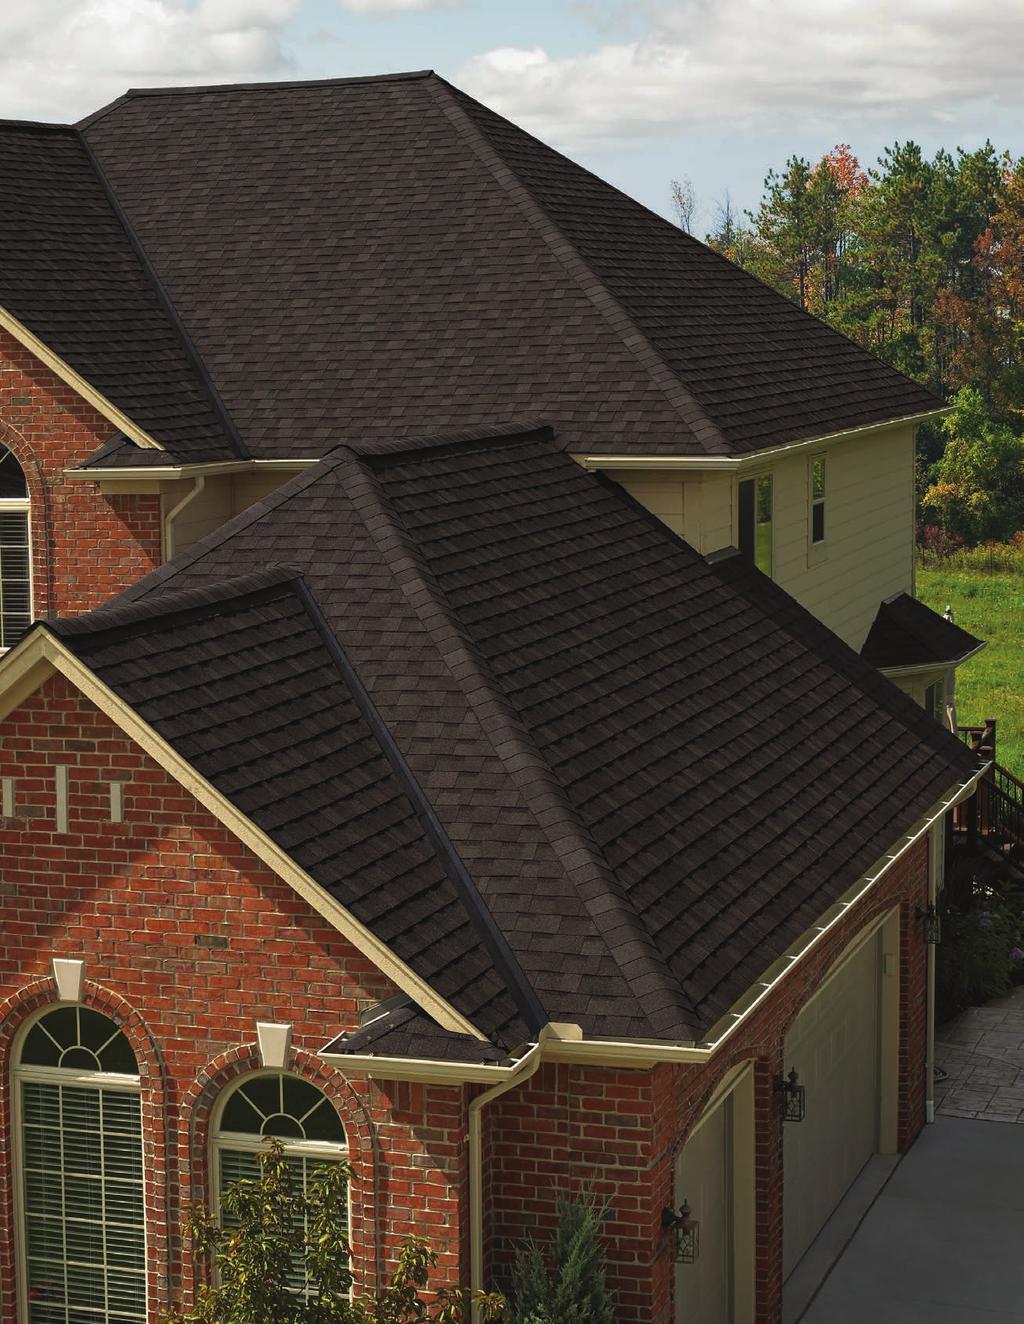 Do you appreciate beautiful options? Then look no further than the Biltmore TM AR, CRC s most popular shingle among contractors and discerning homeowners alike.